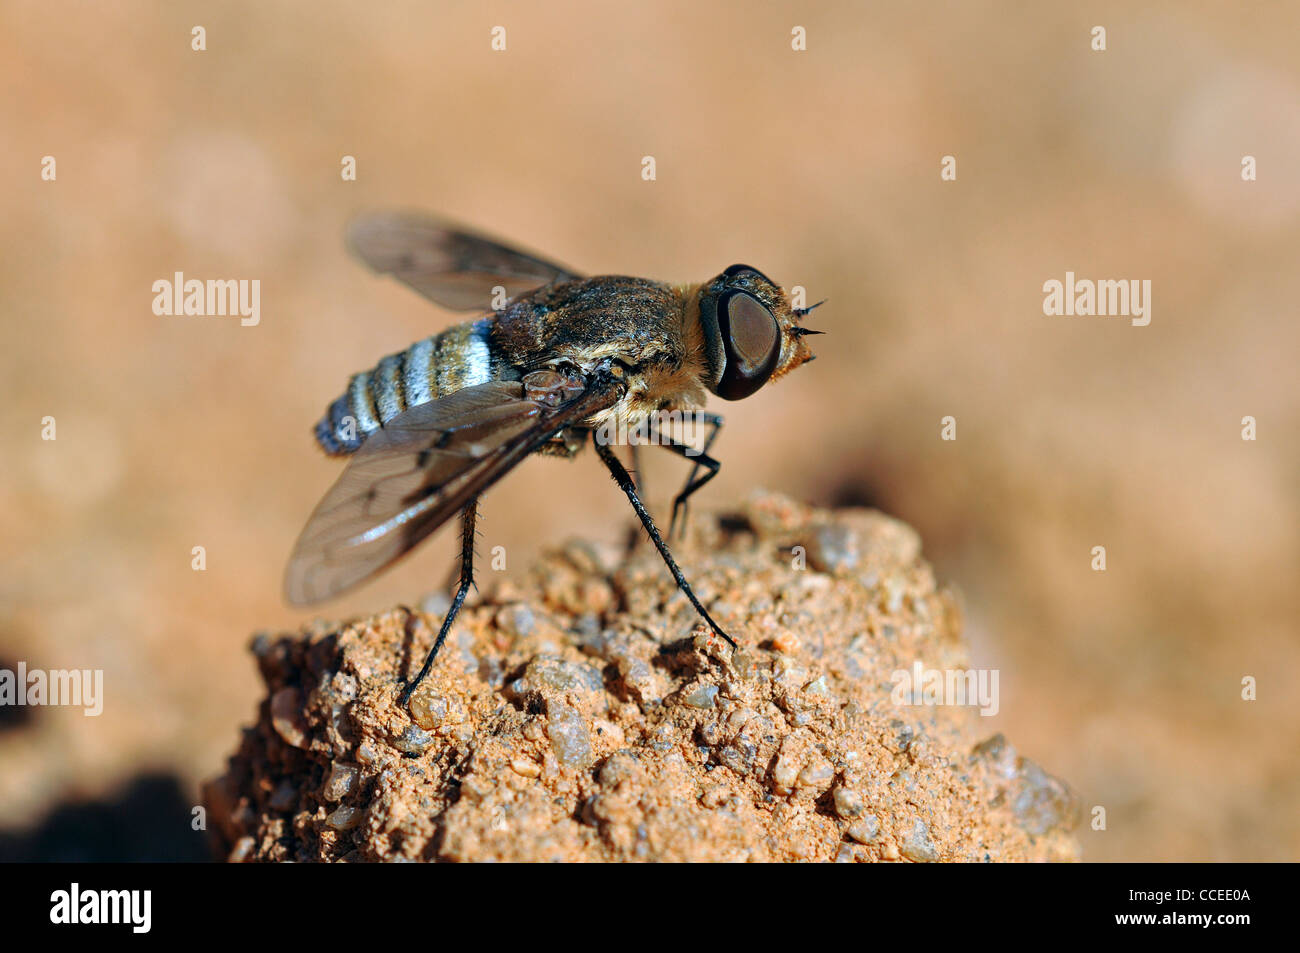 Exoprosopa species of bee-flies family, Goegap Nature Reserve, Namaqualand, South Africa Stock Photo